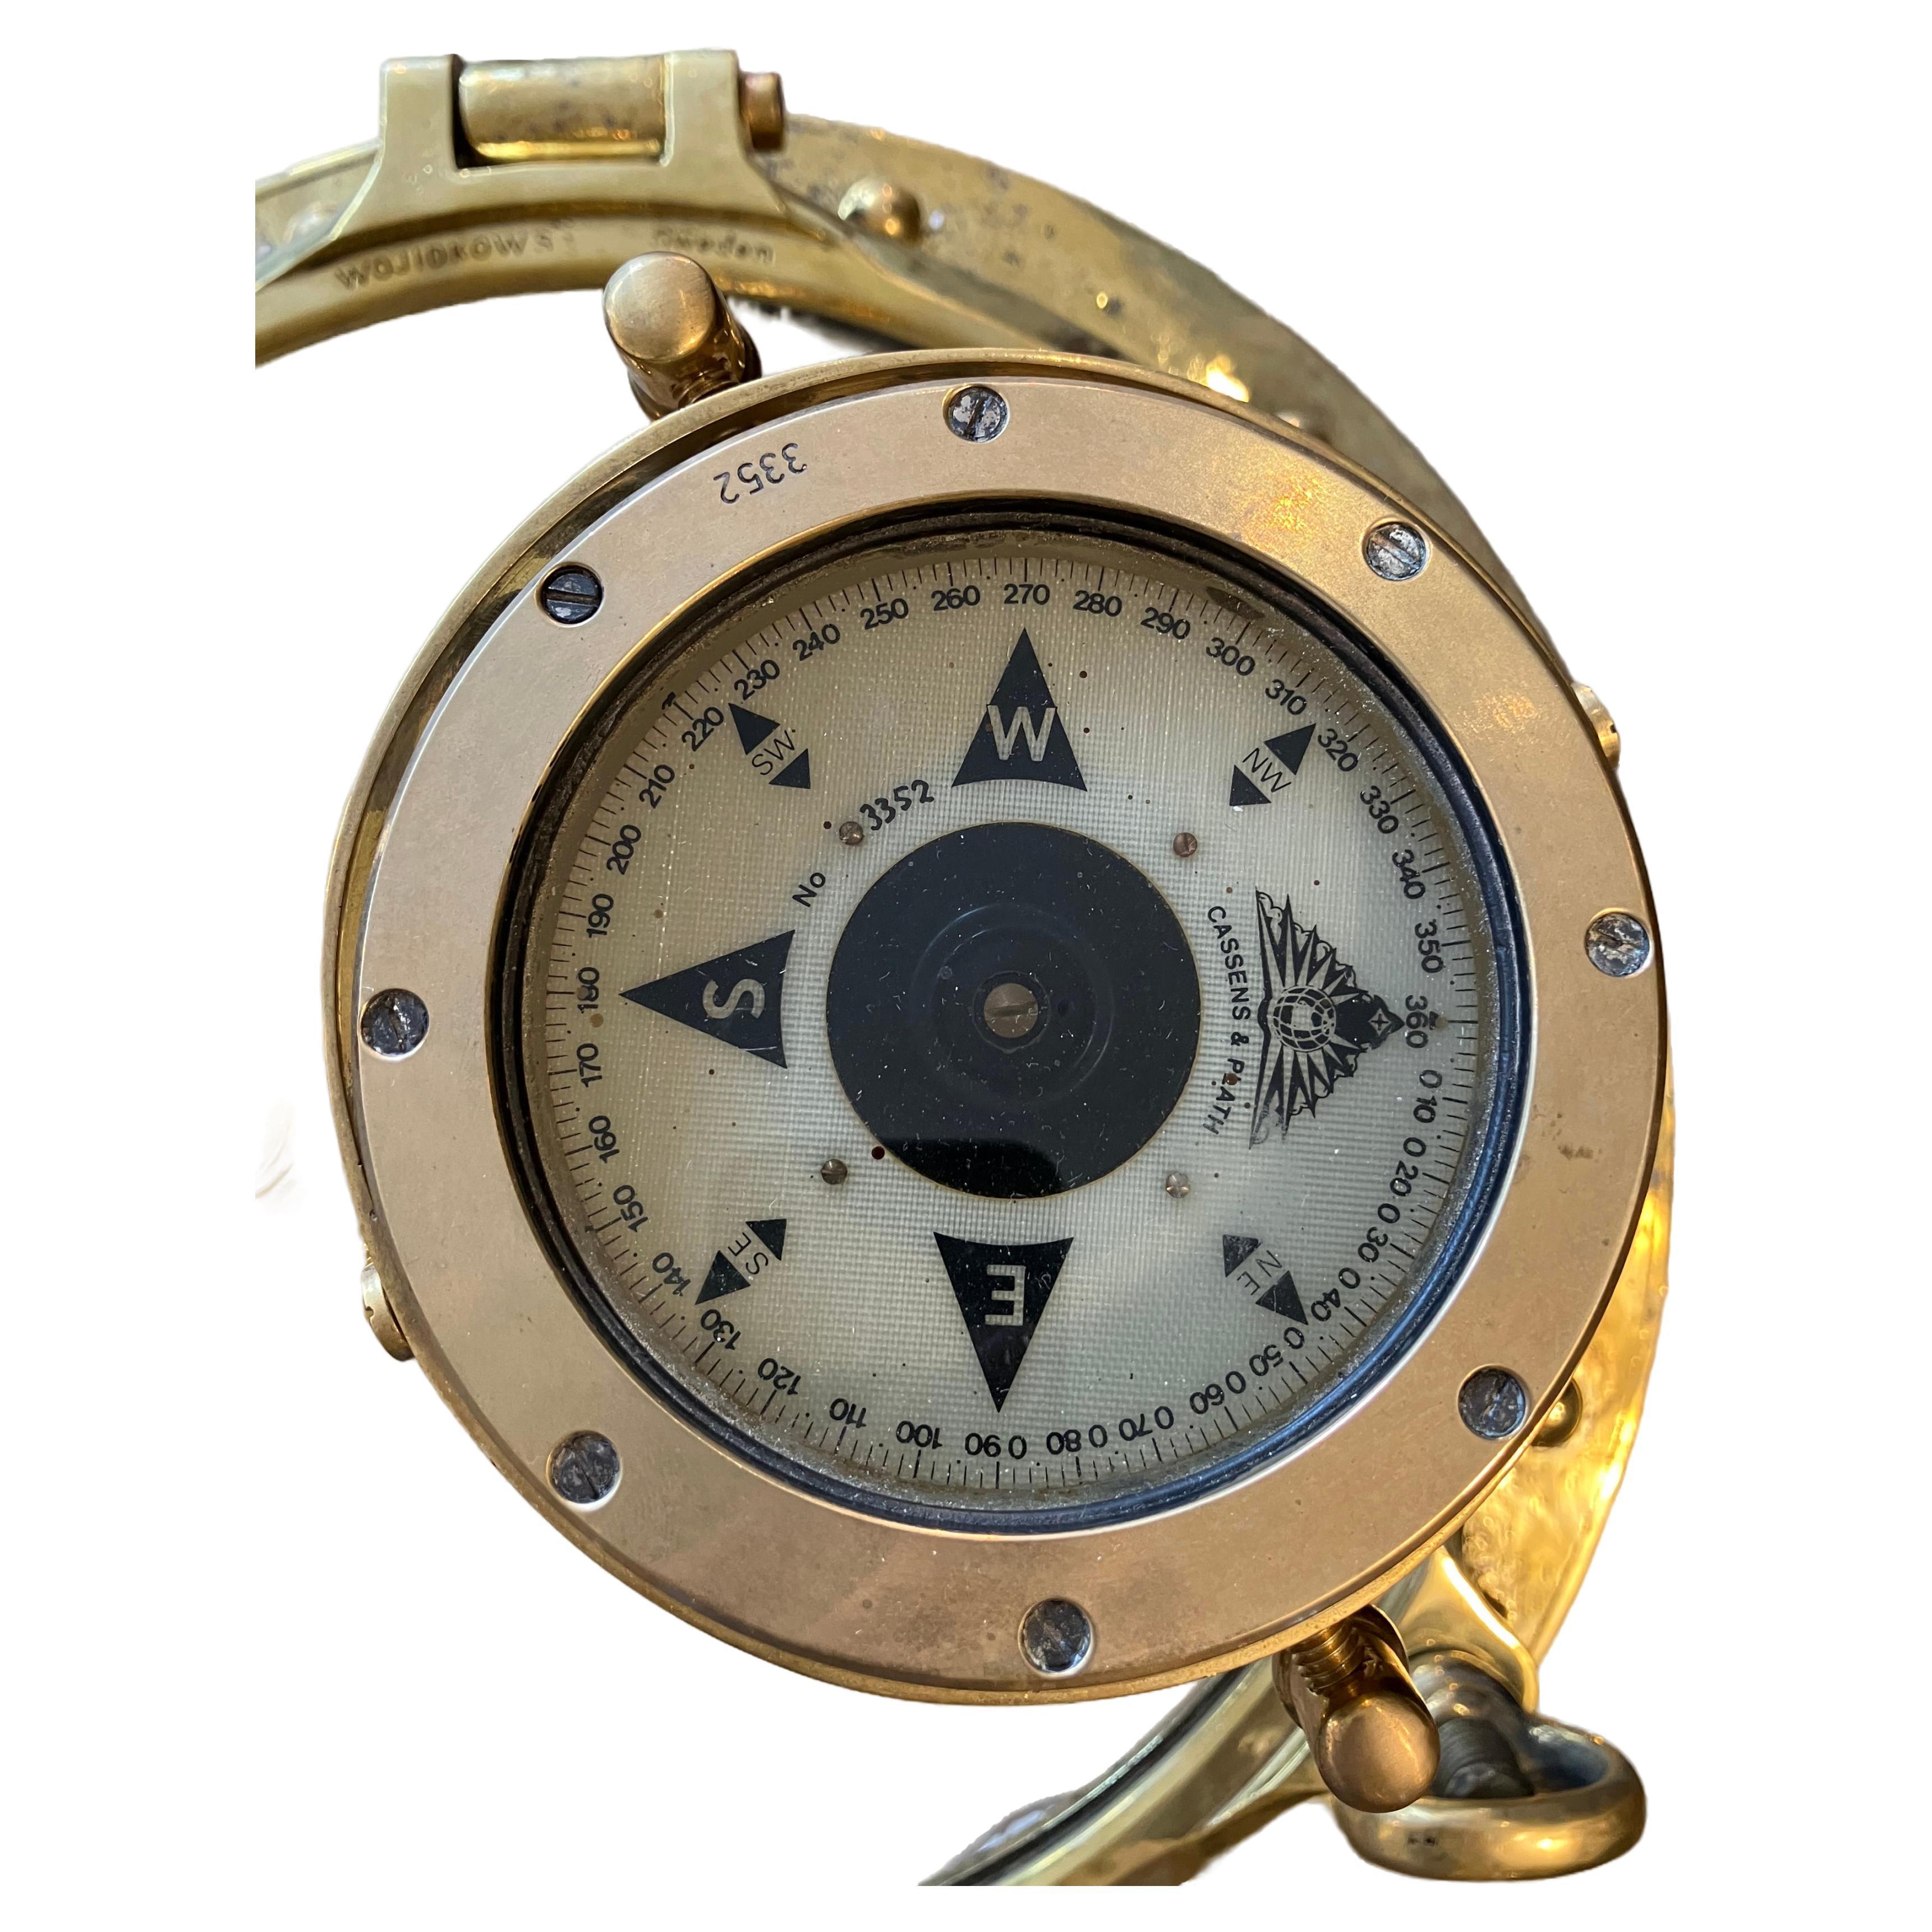 A ship's brass English compass from a decommissioned lifeboat.  This is made by Cassens and Plath, an English company.  An important nautical navigational instrument used when underway.  We had it mounted onto a Y-frame in order for it to continue